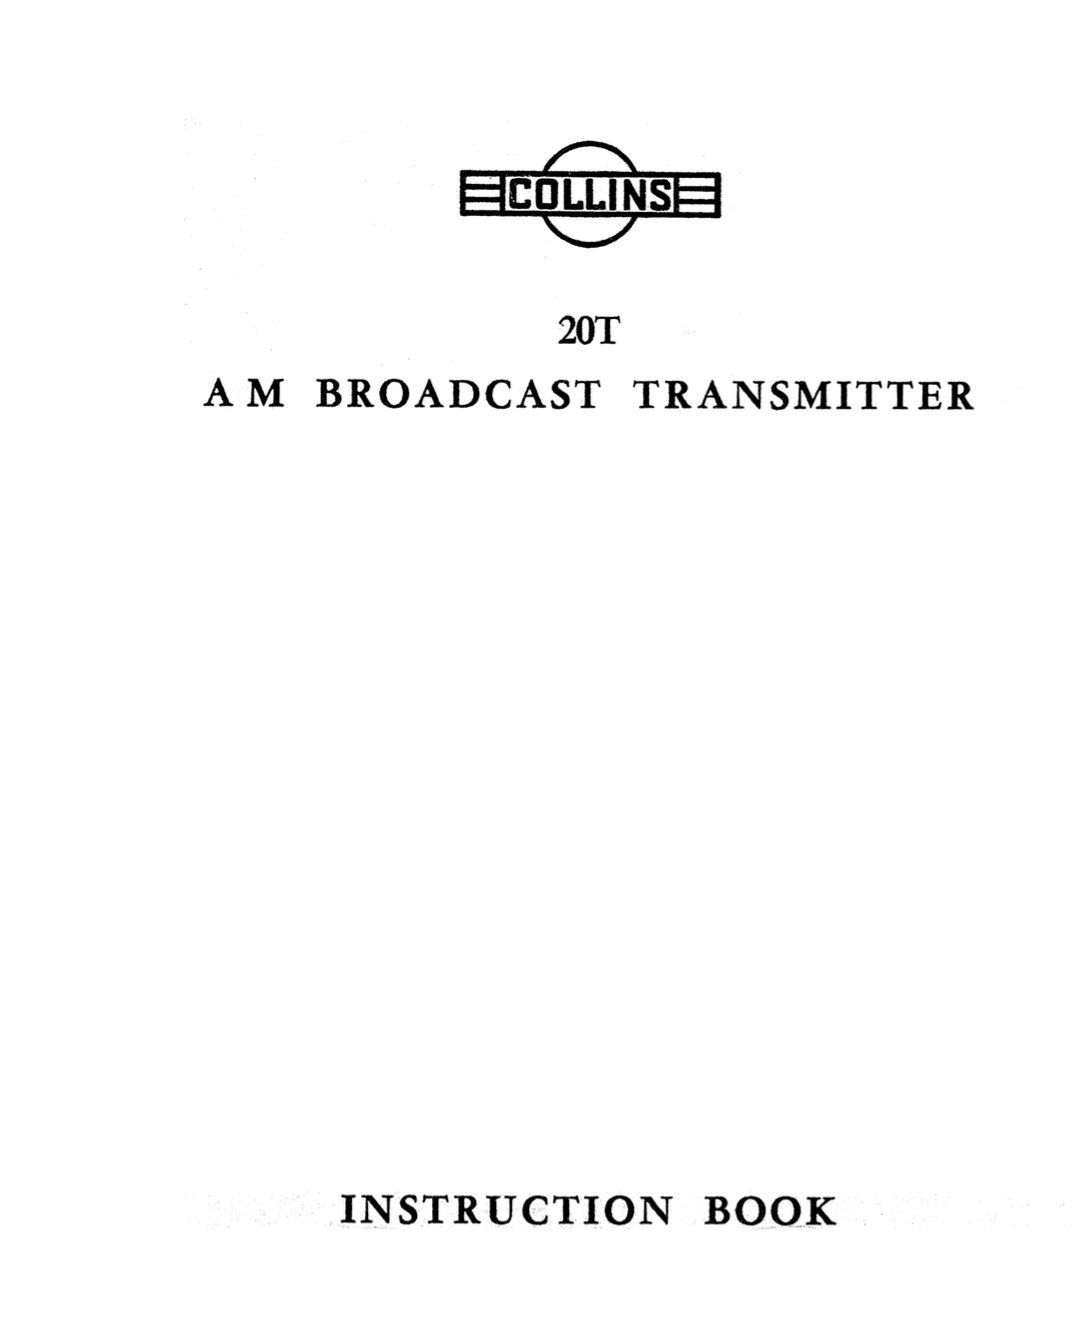 Collins 20T AM Broadcast Transmitter - Instruction and Service Manual